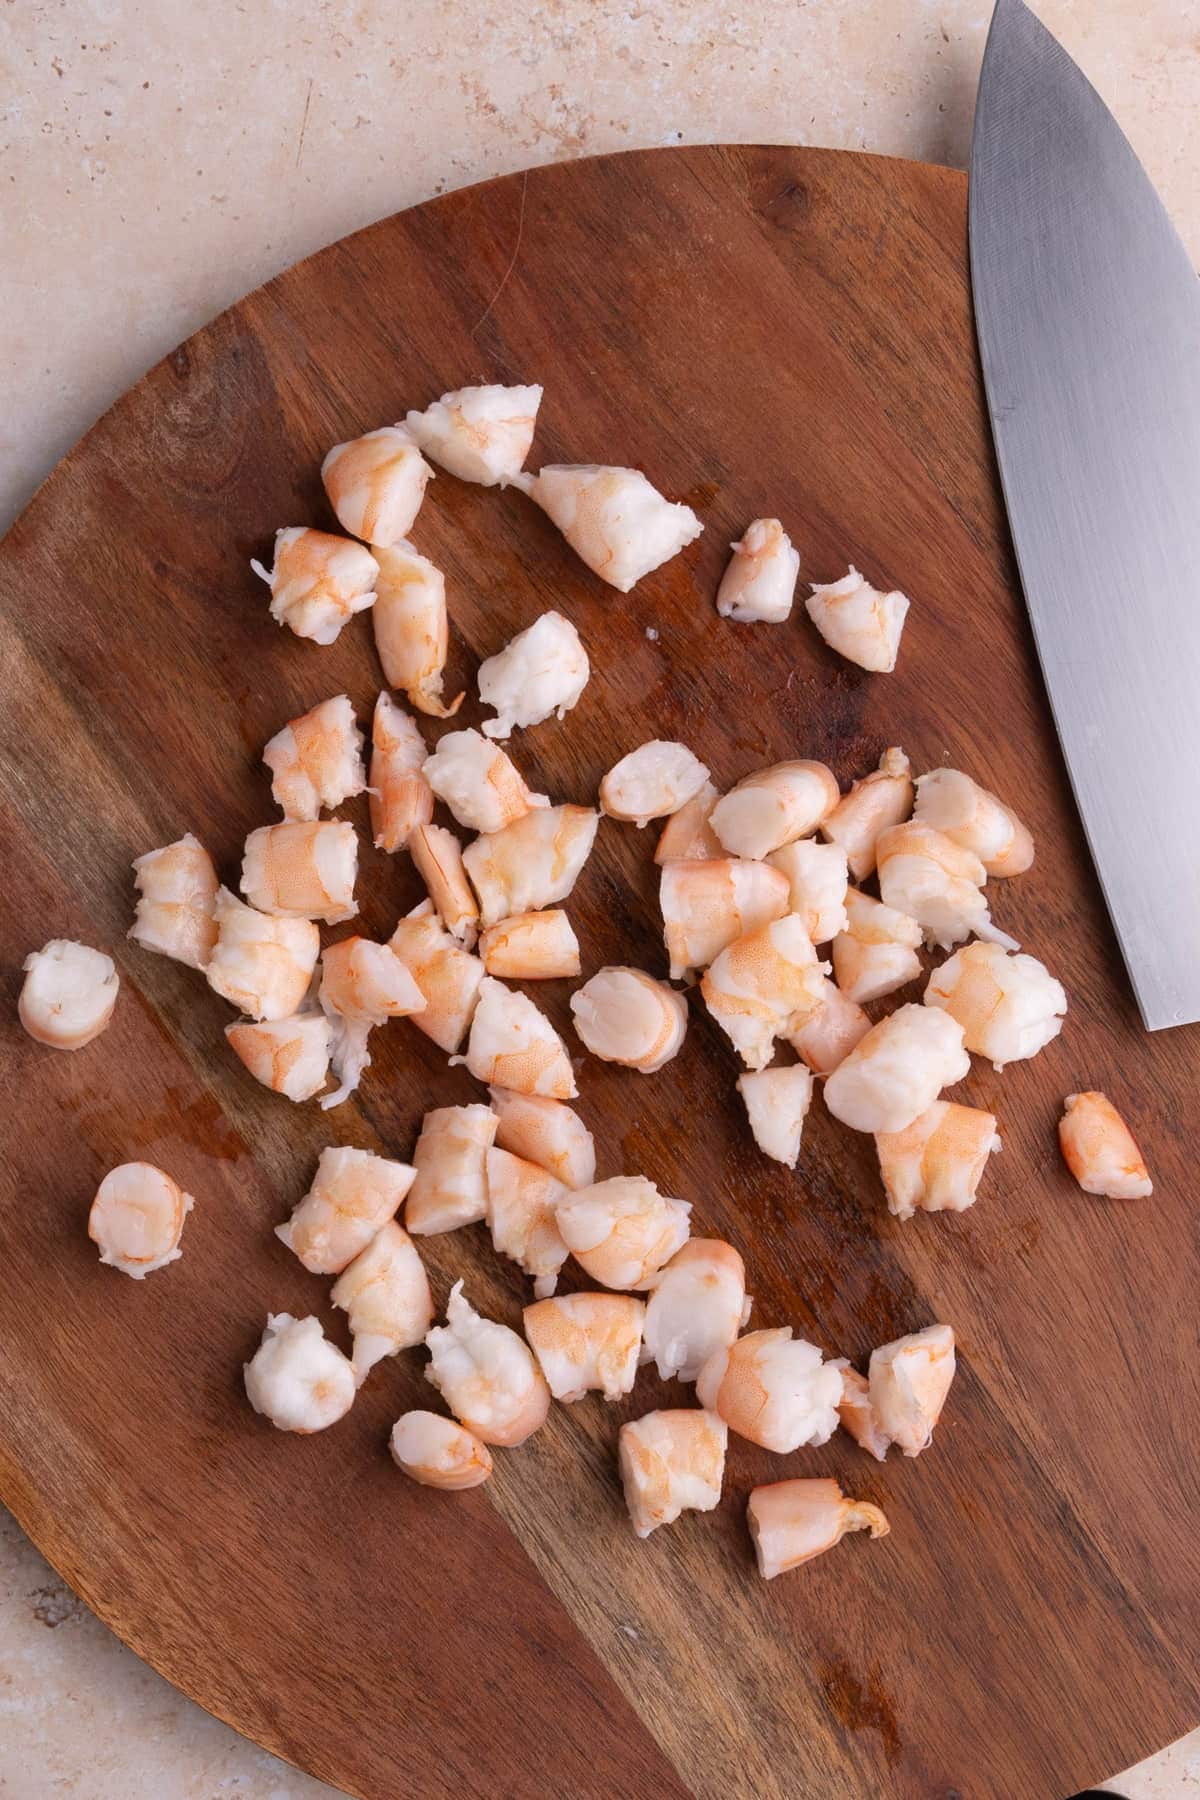 Peeled, cooked, and chopped shrimp ready to add to pasta salad